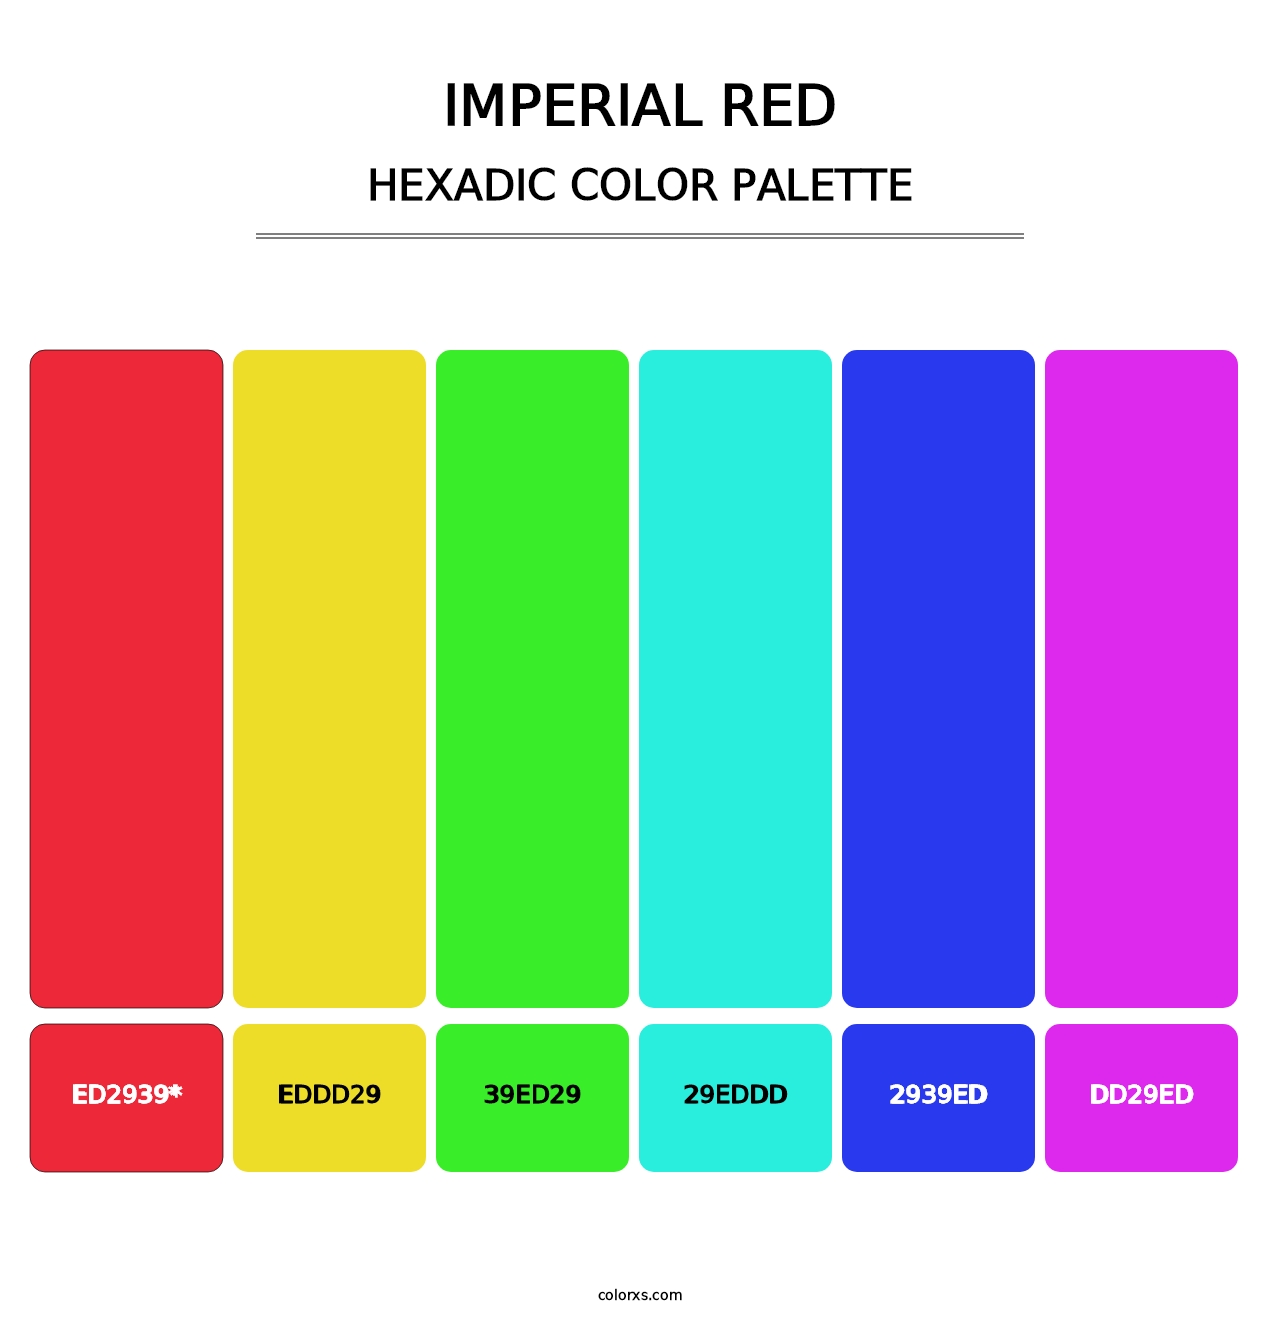 Imperial Red - Hexadic Color Palette